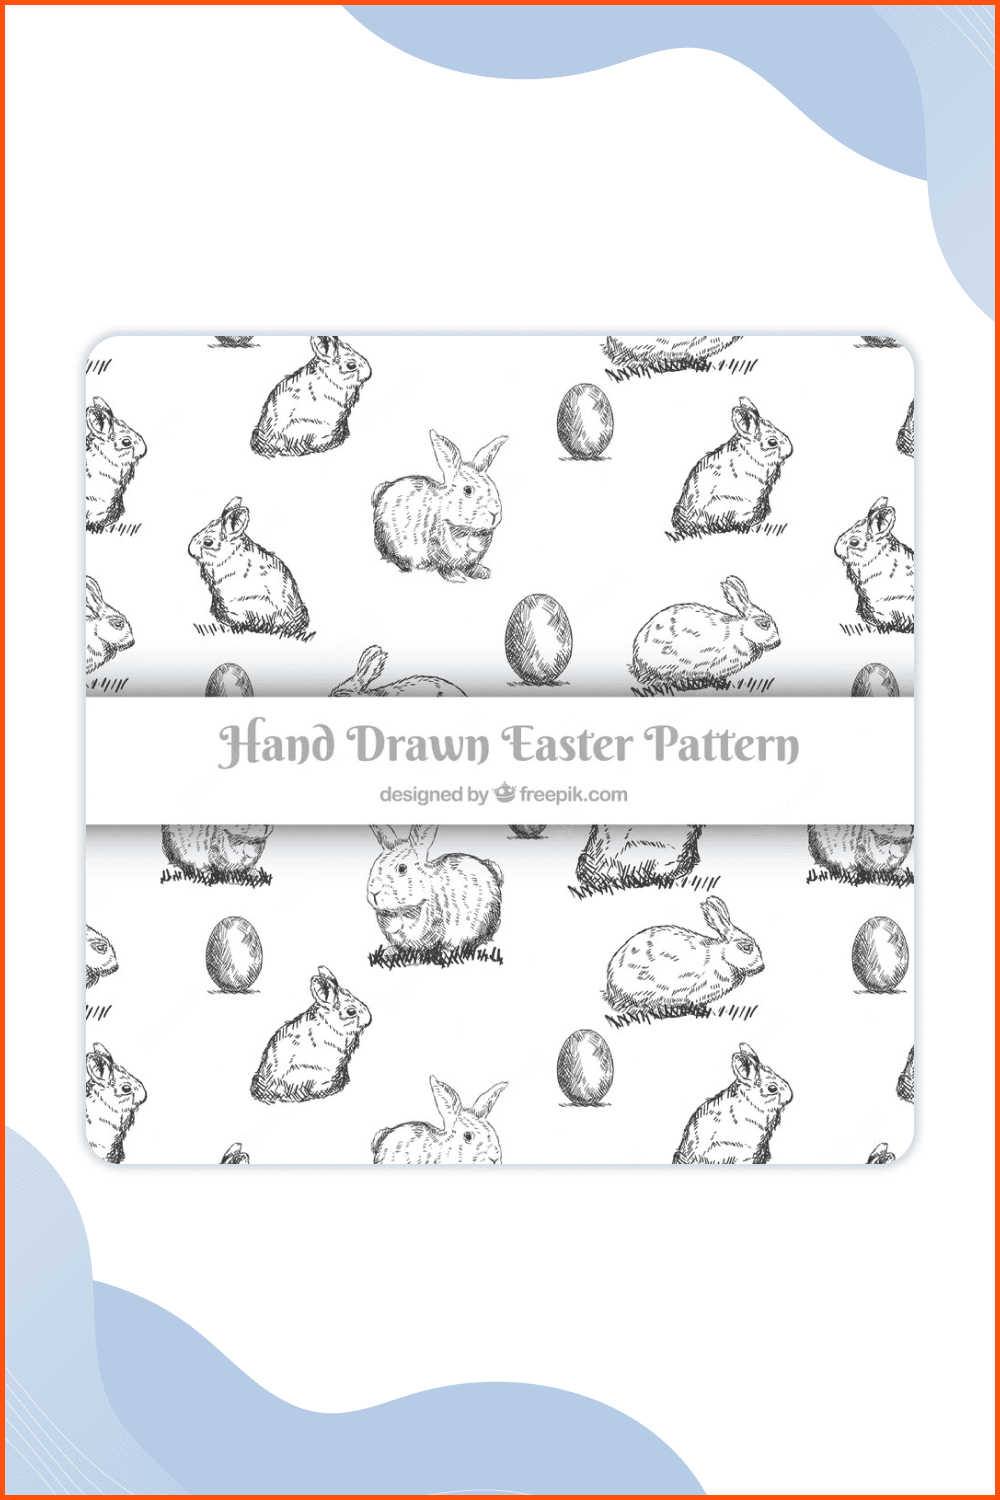 Hand drawn easter day pattern collection.